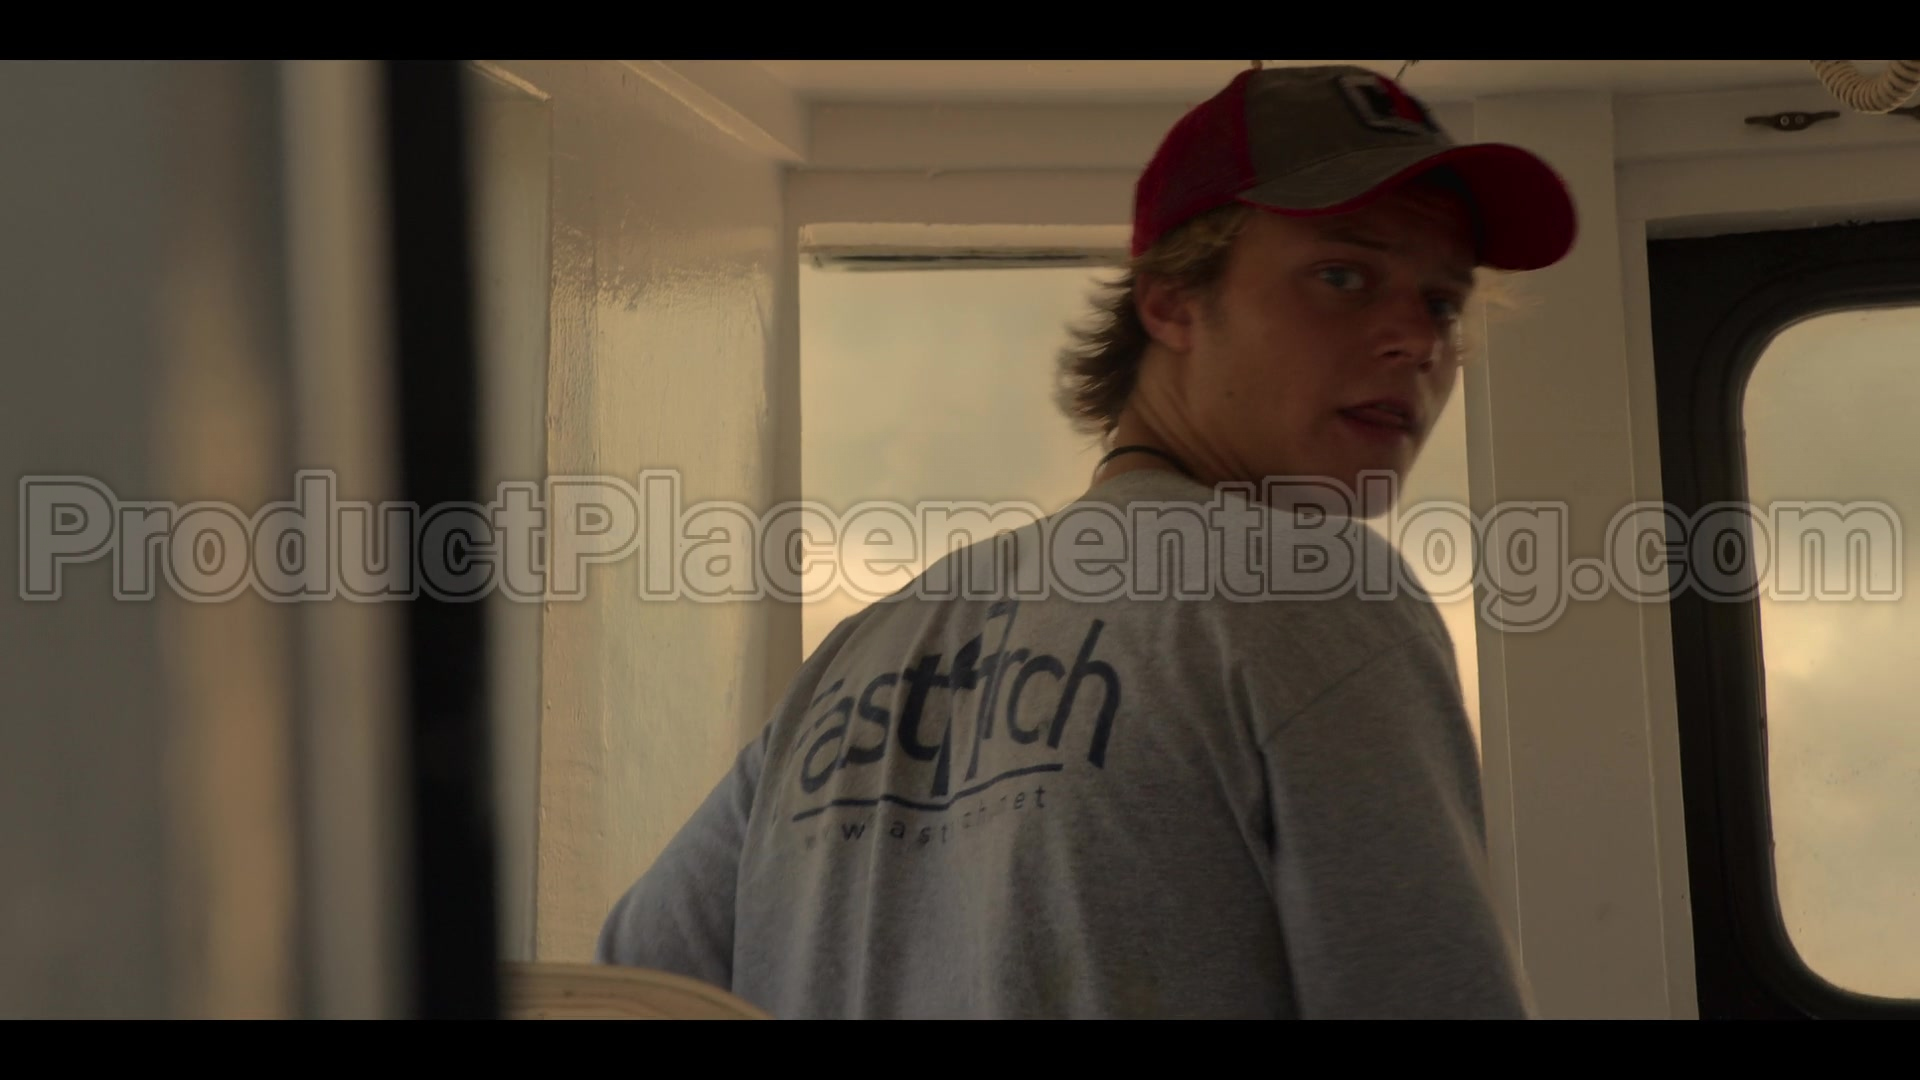 Fast Arch Fastarch Net Sweatshirt Of Rudy Pankow As Jj In Outer Banks S01e03 In Outer Banks S01e03 The Forbidden Zone 2020